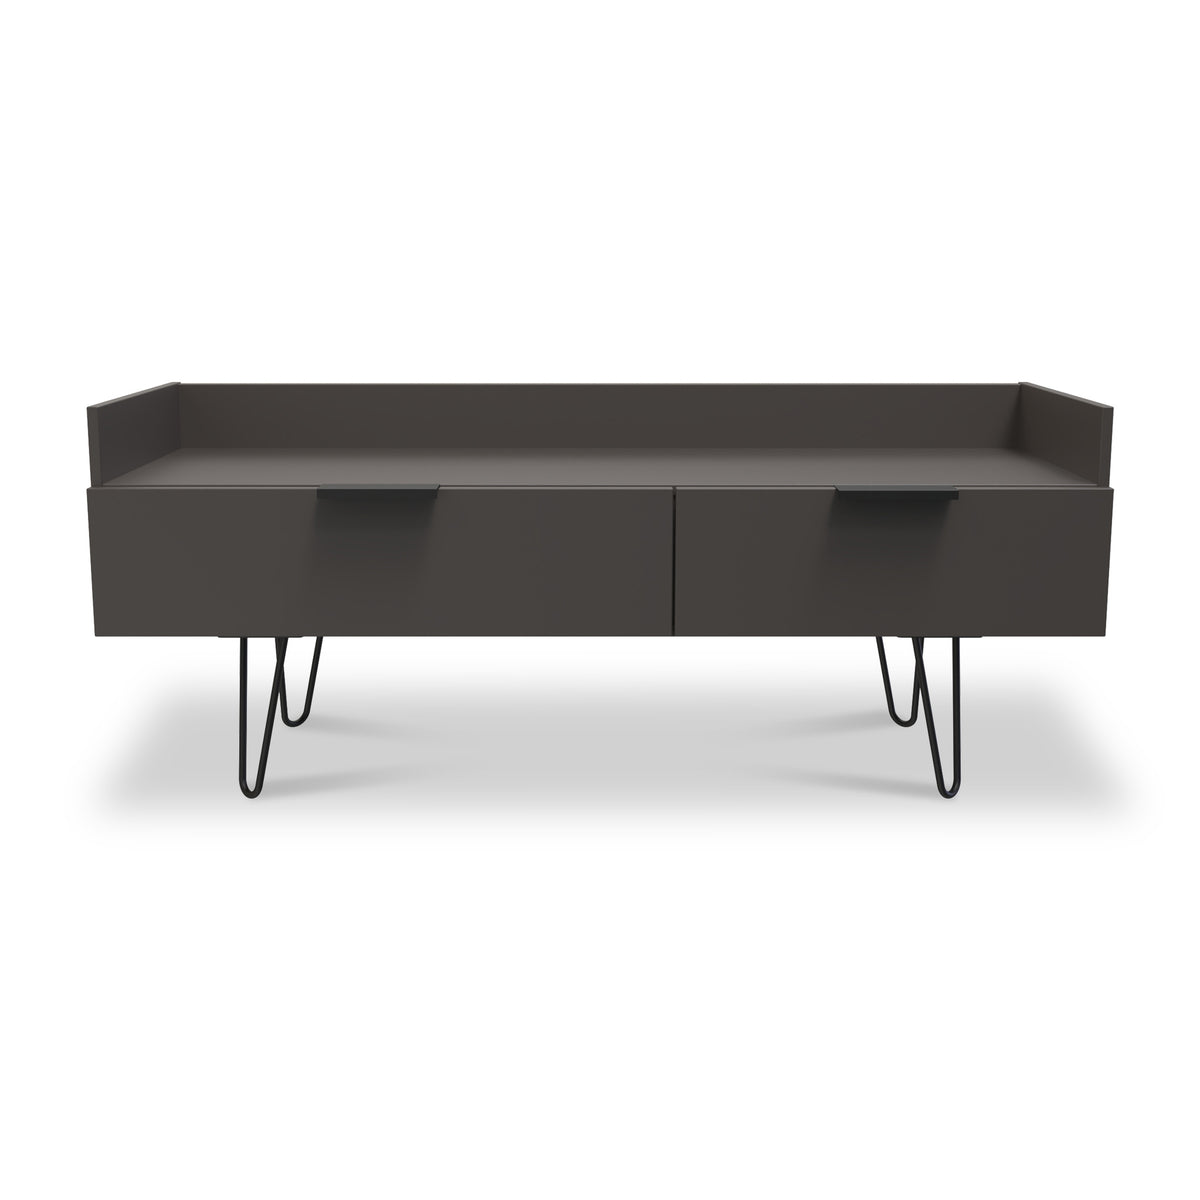 Moreno Graphite Grey 2 Drawer TV Unit Stand with  hairpin legs from Roseland Furniture